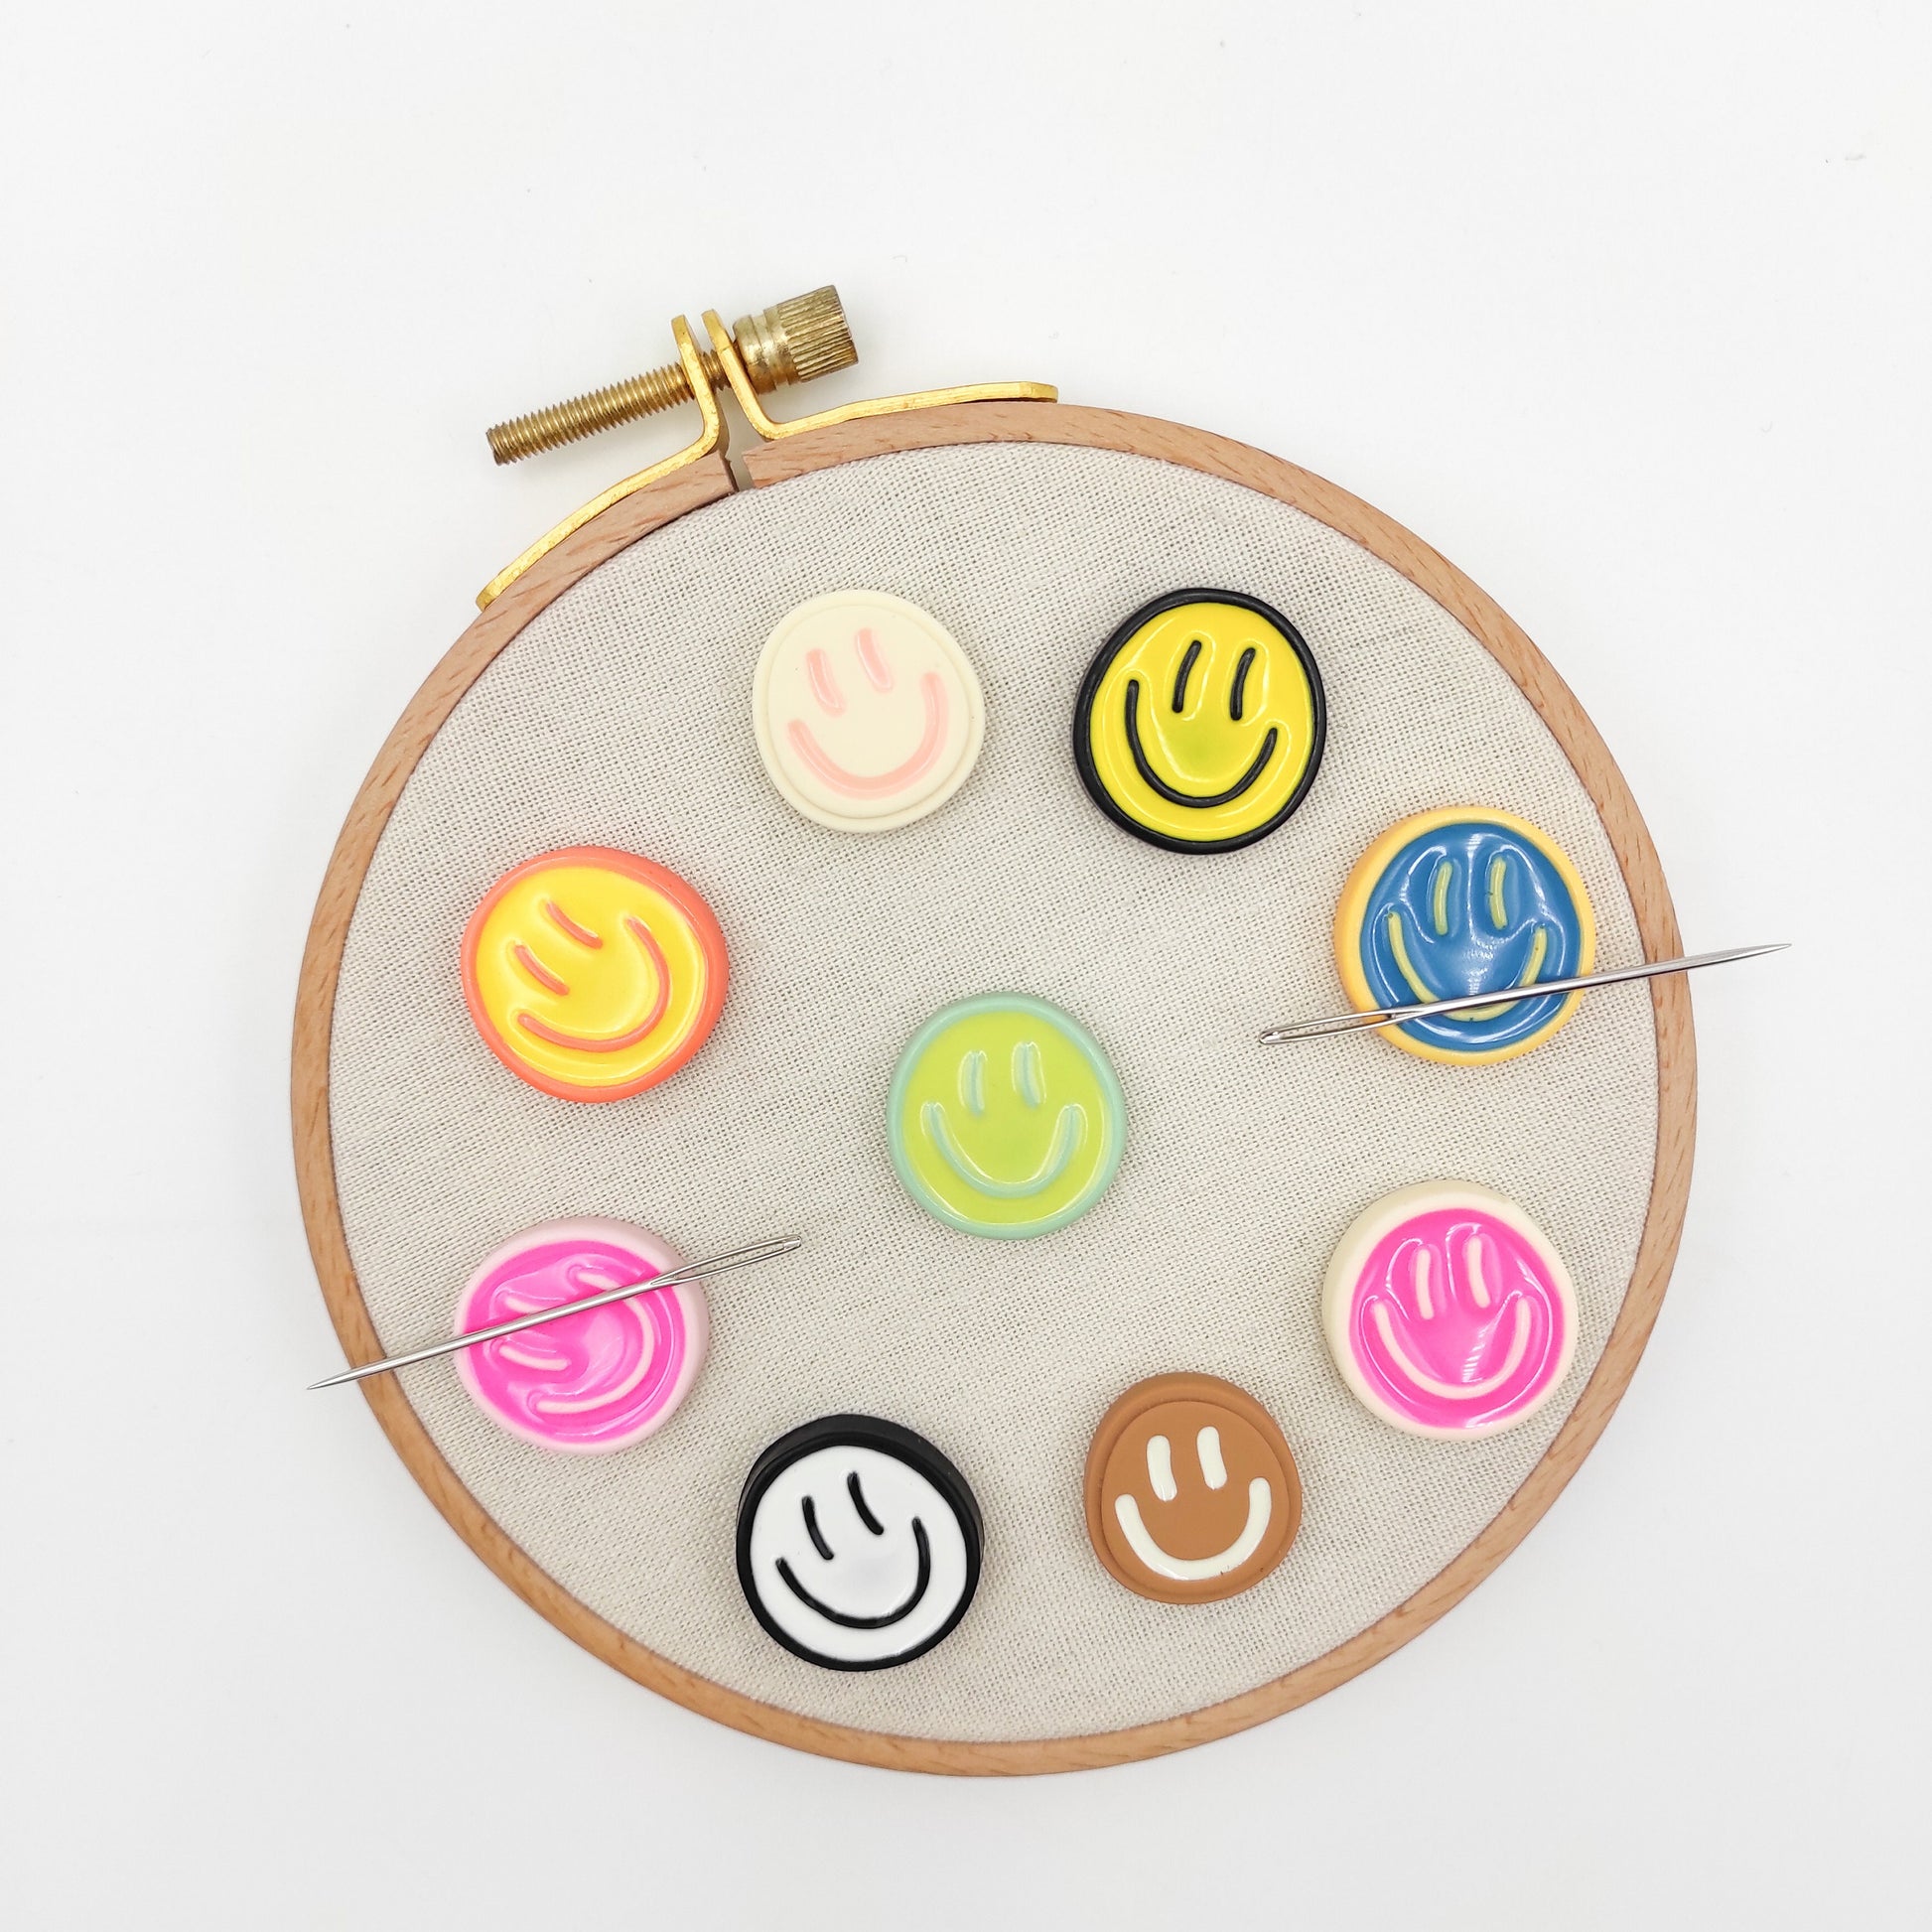 Smile Face Resin needle minders, Needle Minder for Embroidery, Cross  Stitch, Needle work, needlecraft projects and sewing.